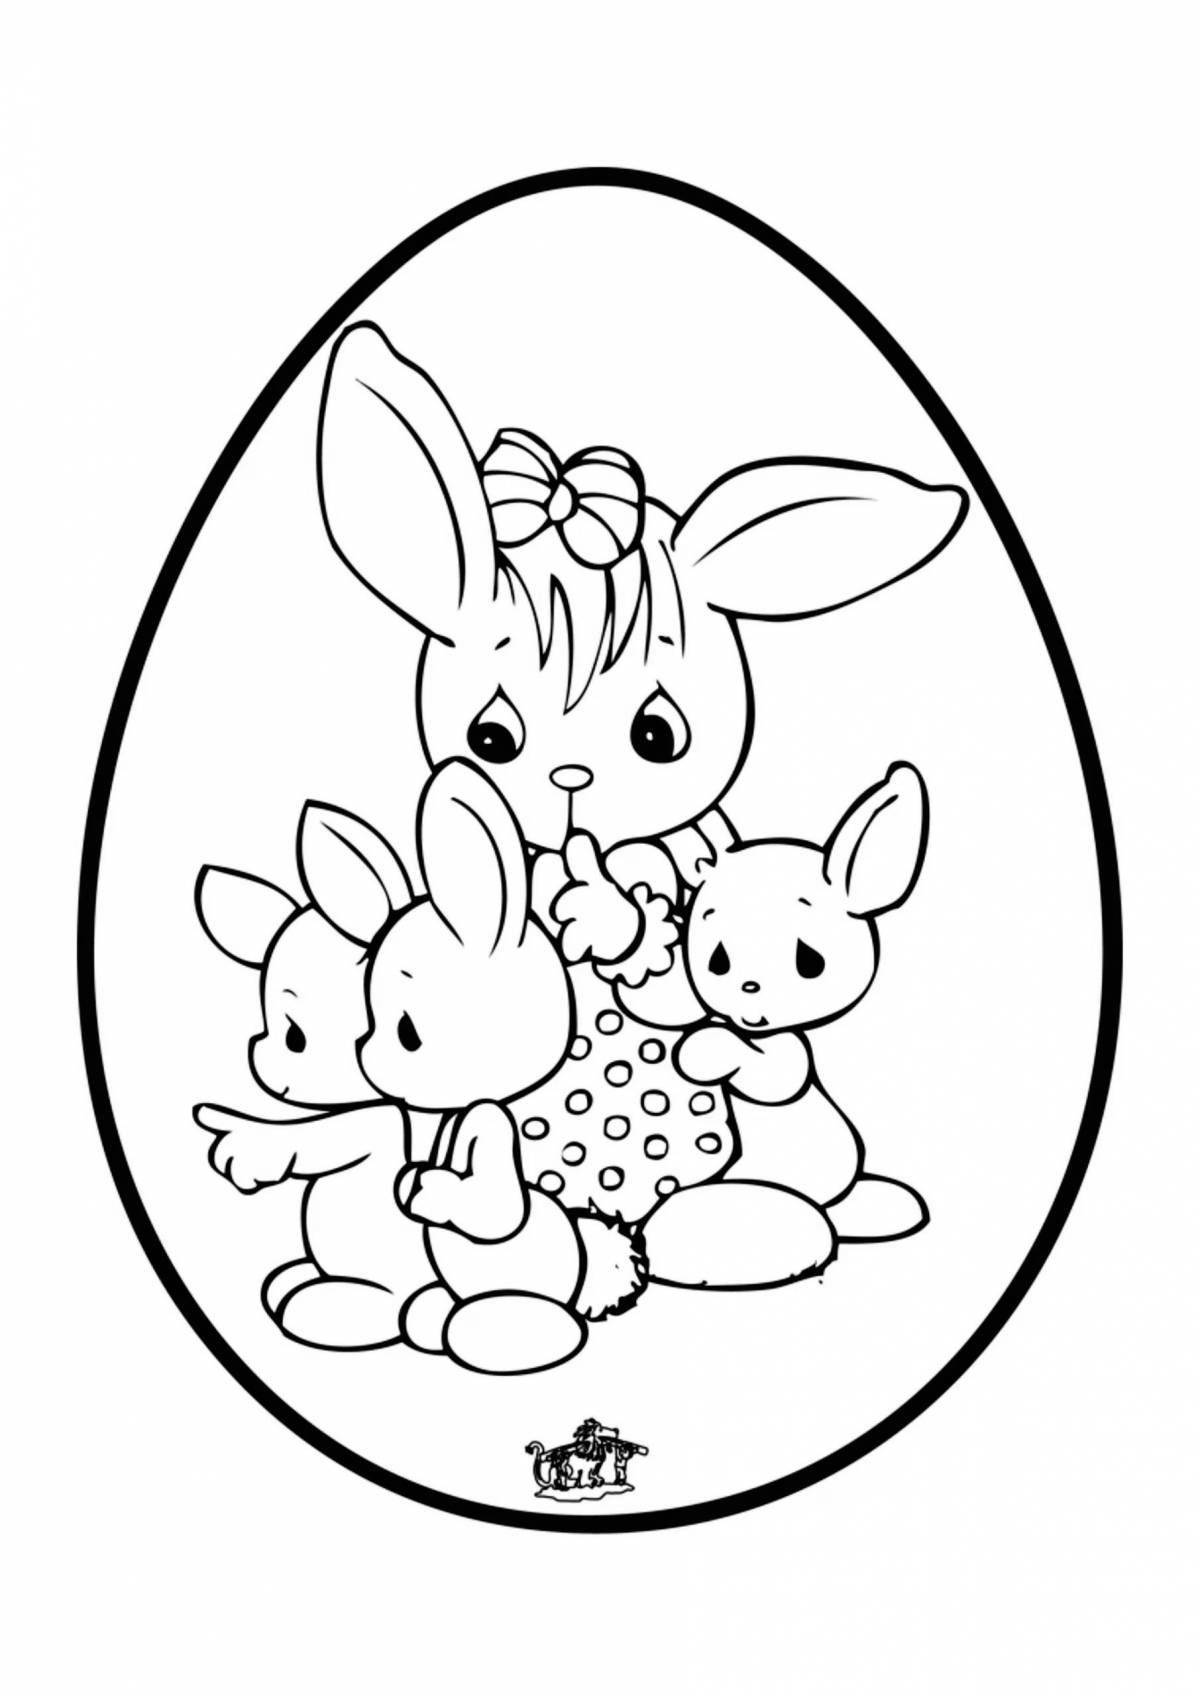 Humorous coloring pages for girls rabbits